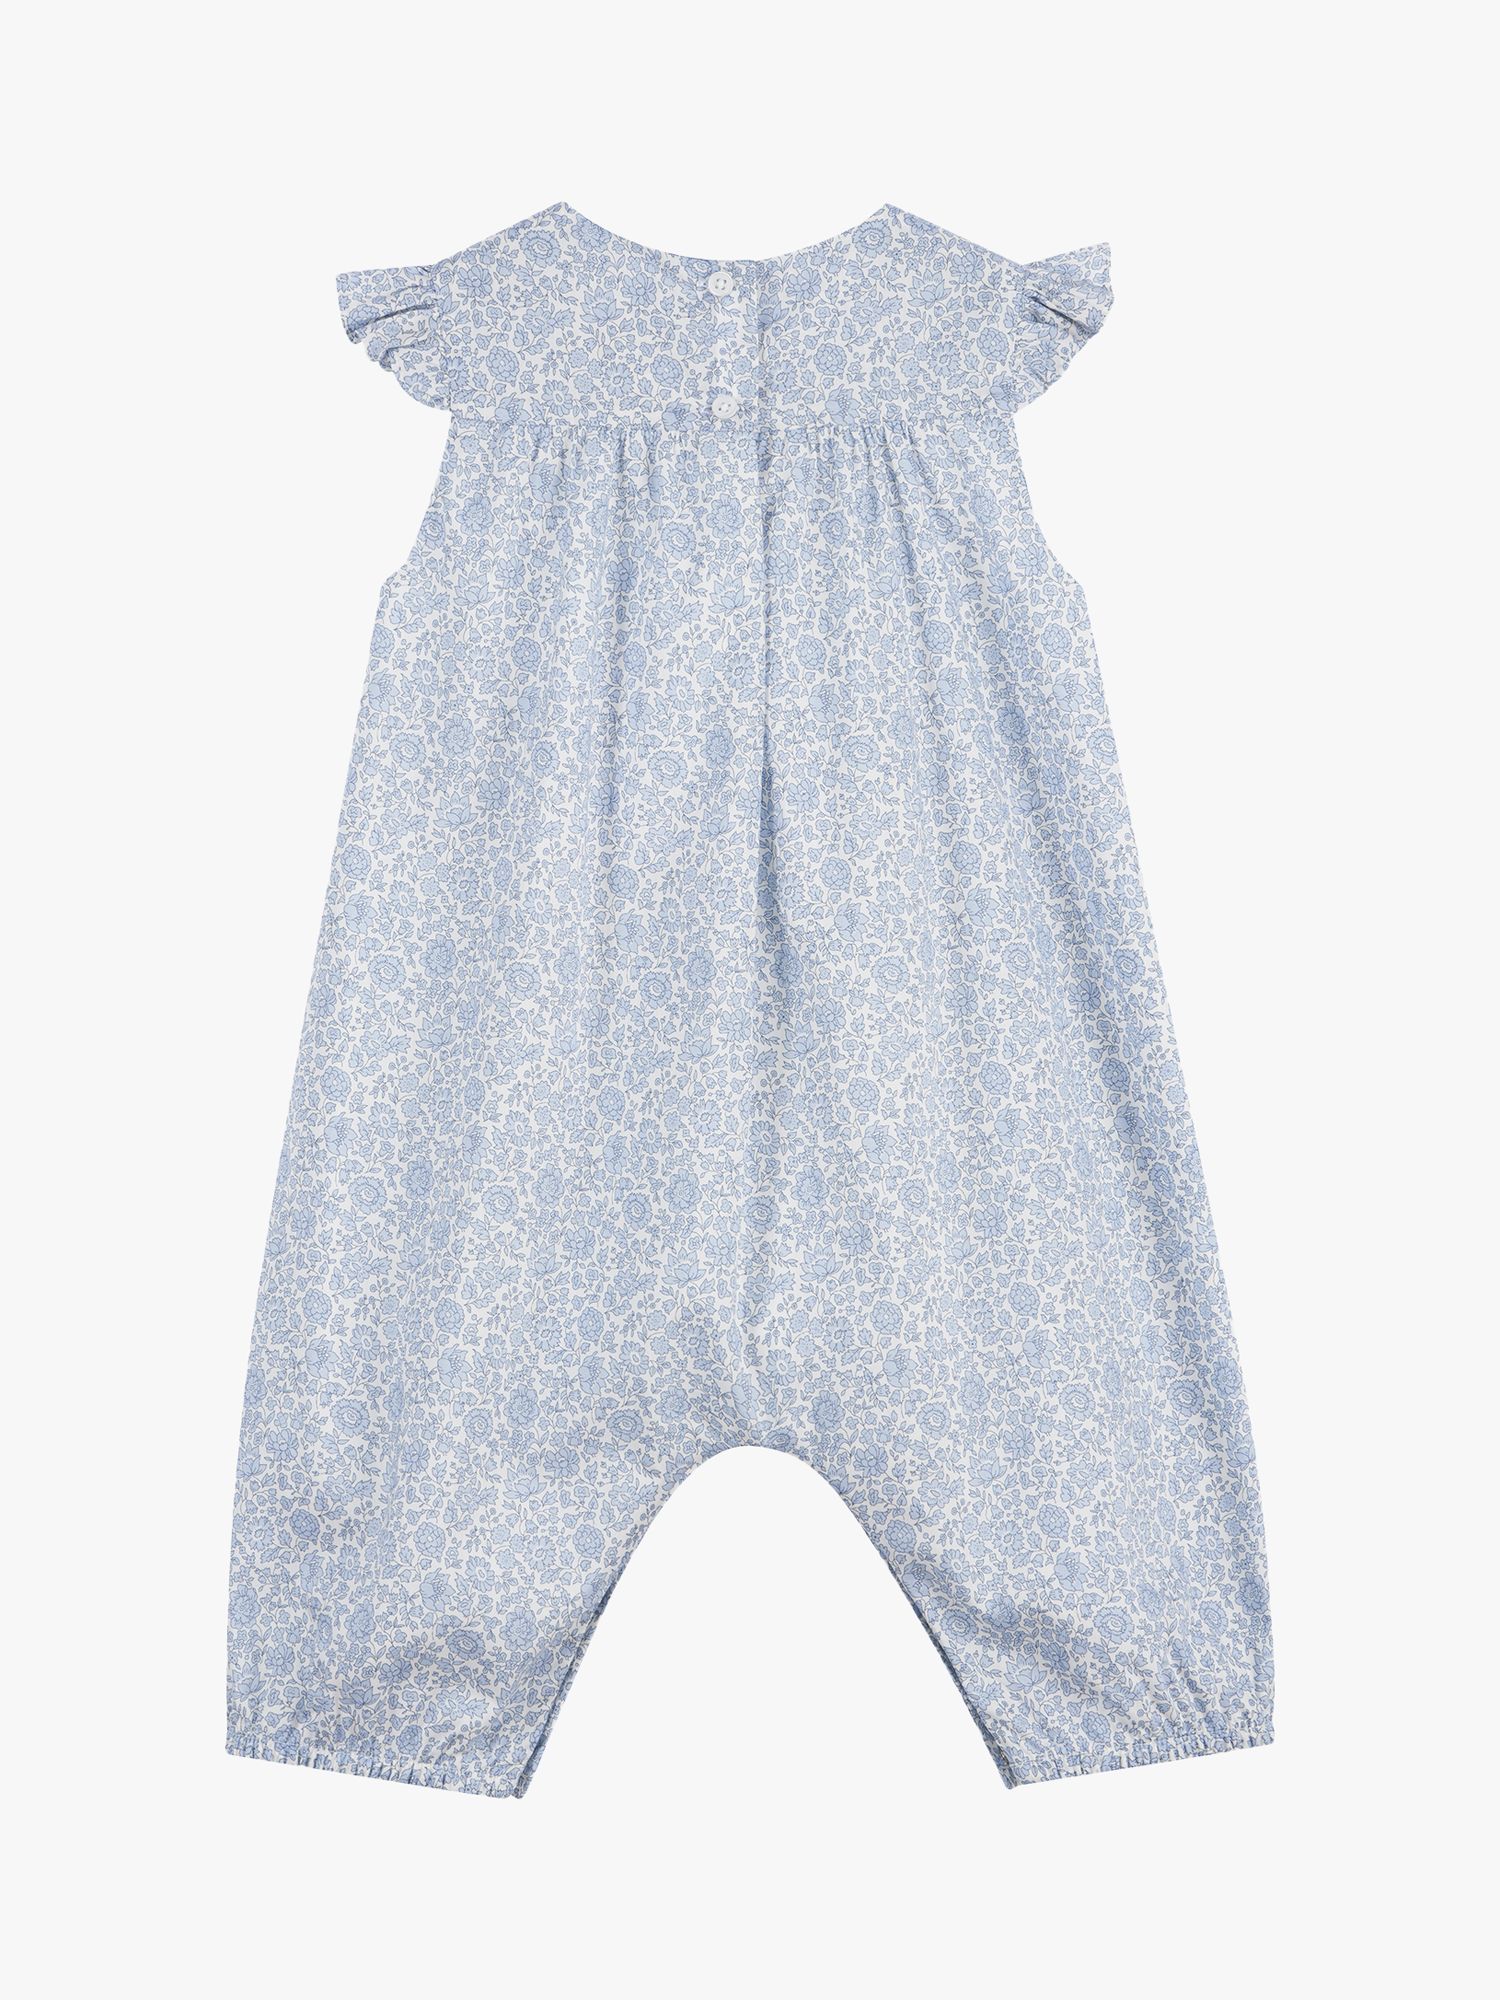 Buy Trotters Baby Liberty D'Anjo Floral Print Frill Sleeve Romper, Blue Online at johnlewis.com